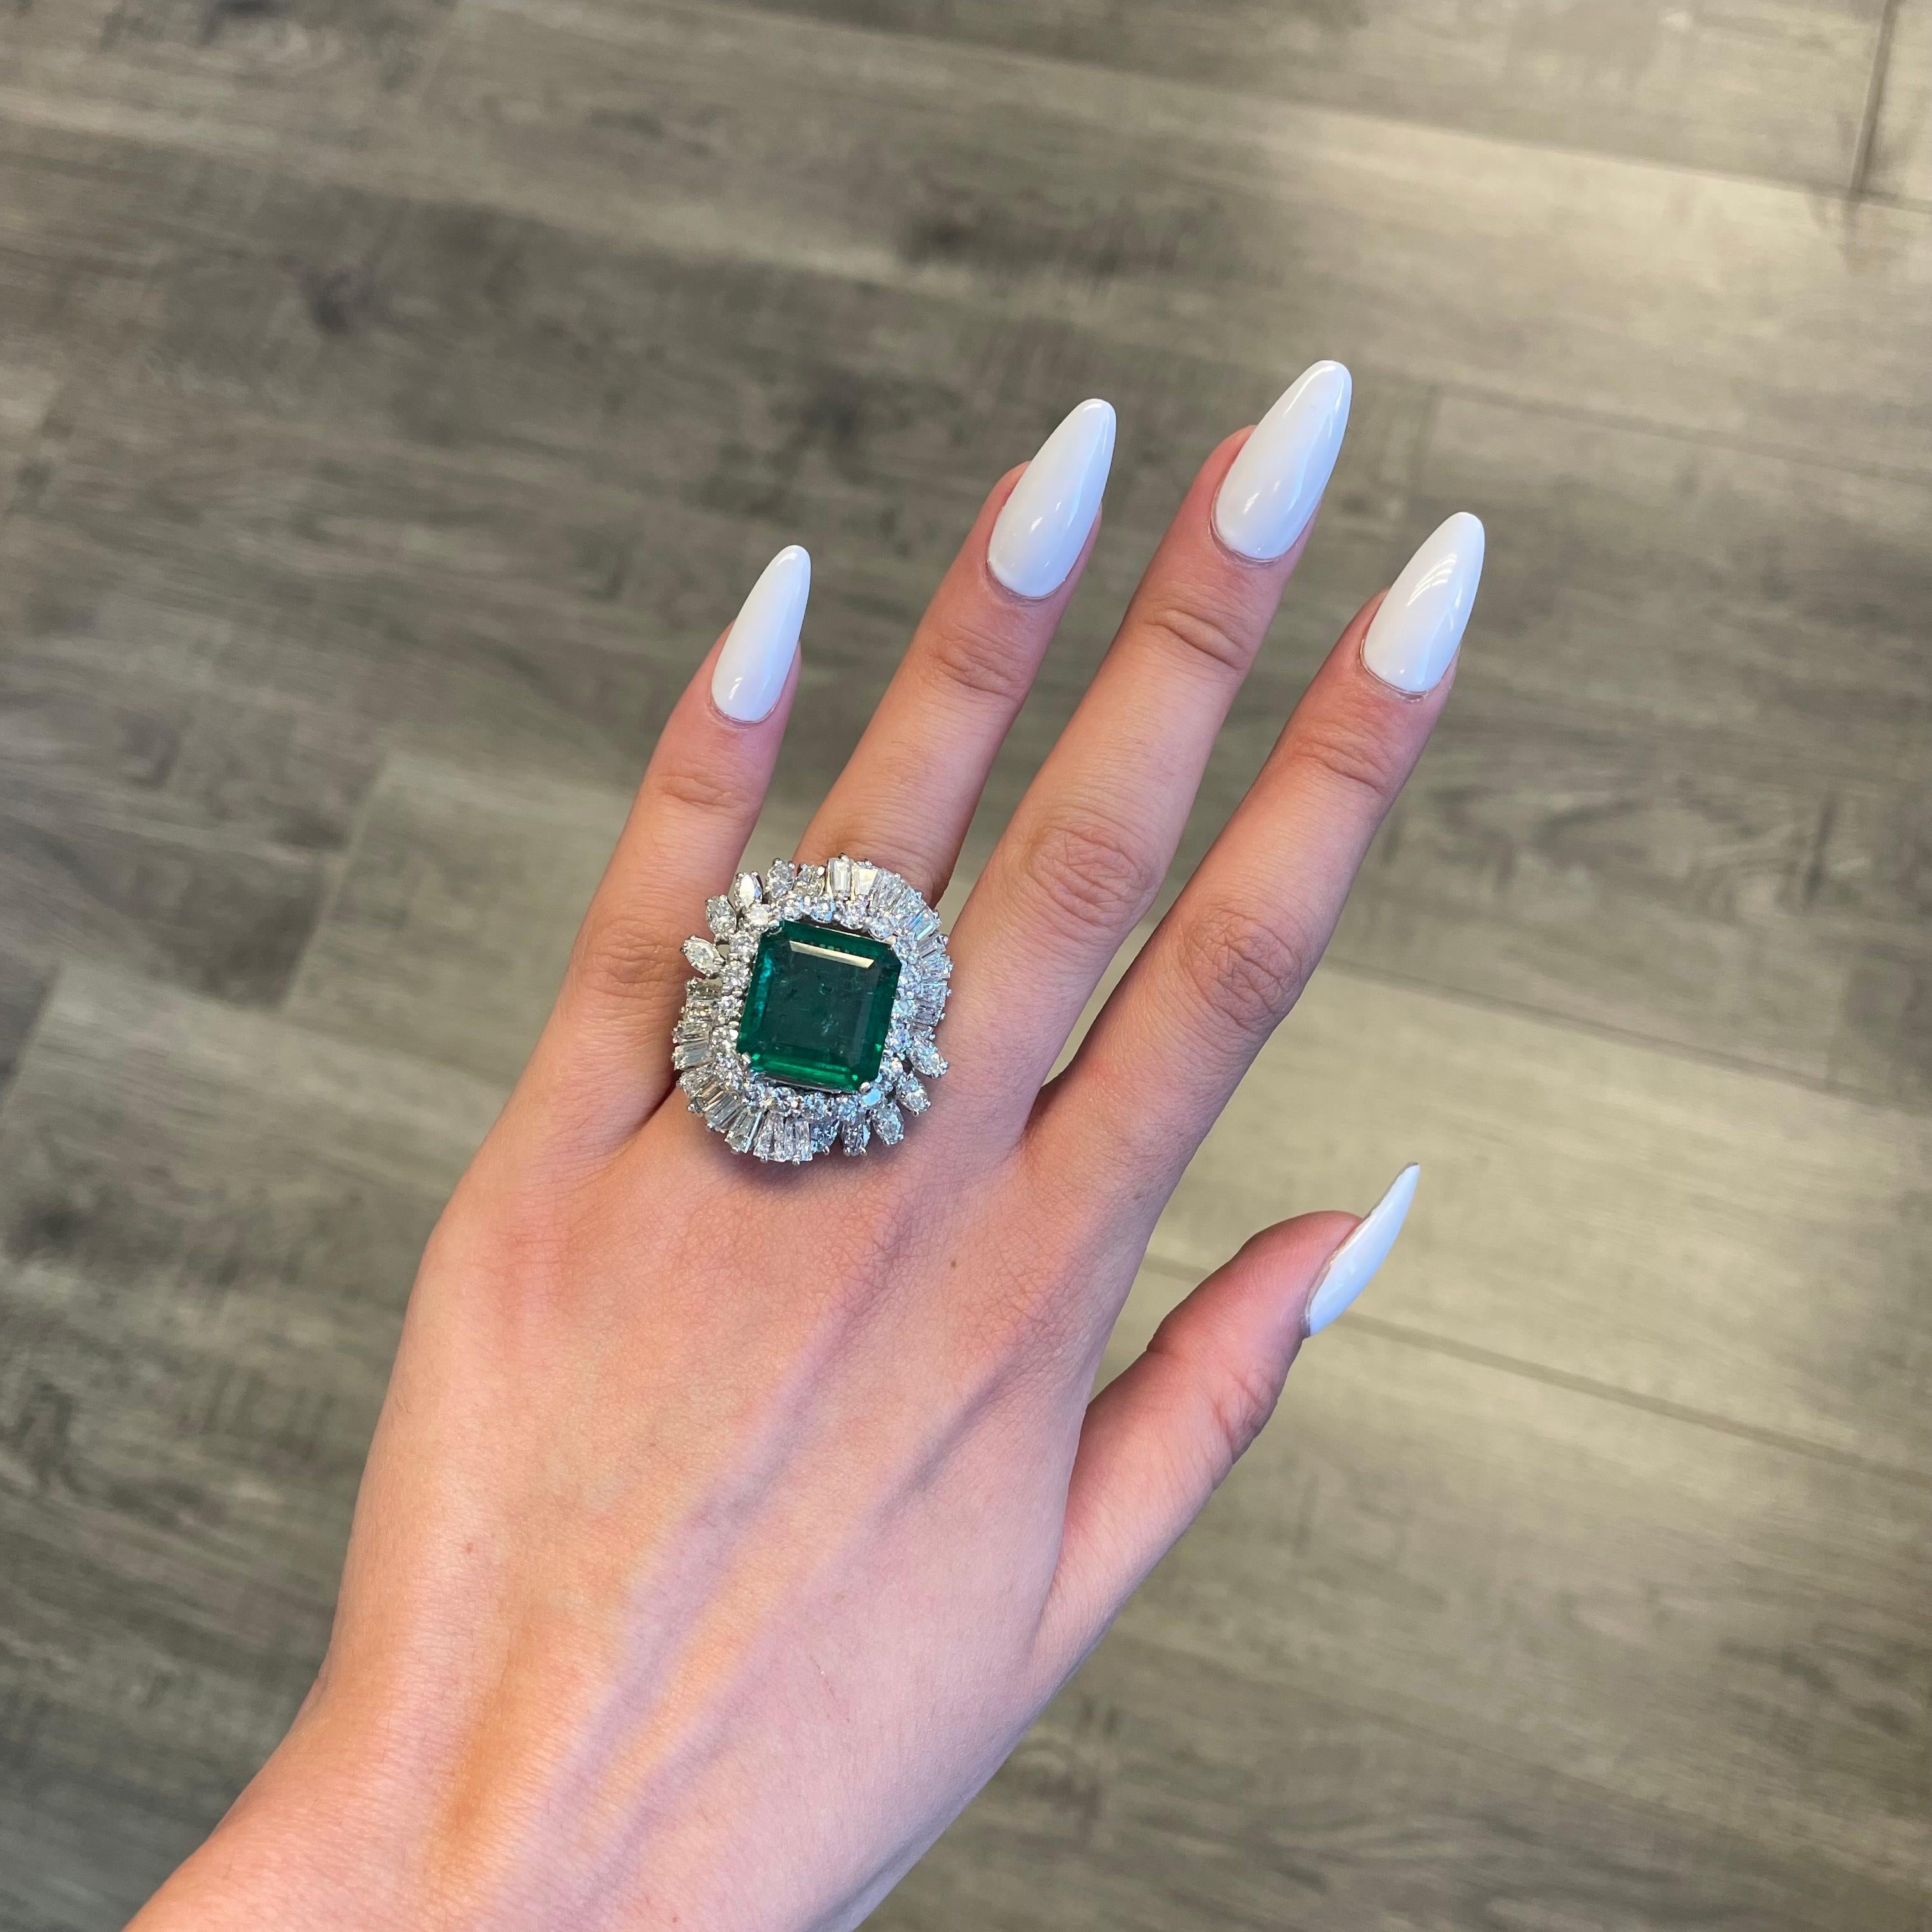 Vintage emerald with diamonds high jewelry ring, circa 1970's.  
Approximately 21.97ct total gemstone weight. 
13.07ct Zambian emerald, F1 minor oil, GIA certified. Surrounded by apx 8.90ct of 20 round, 10 marquise, and 20 baguette diamonds. 18k